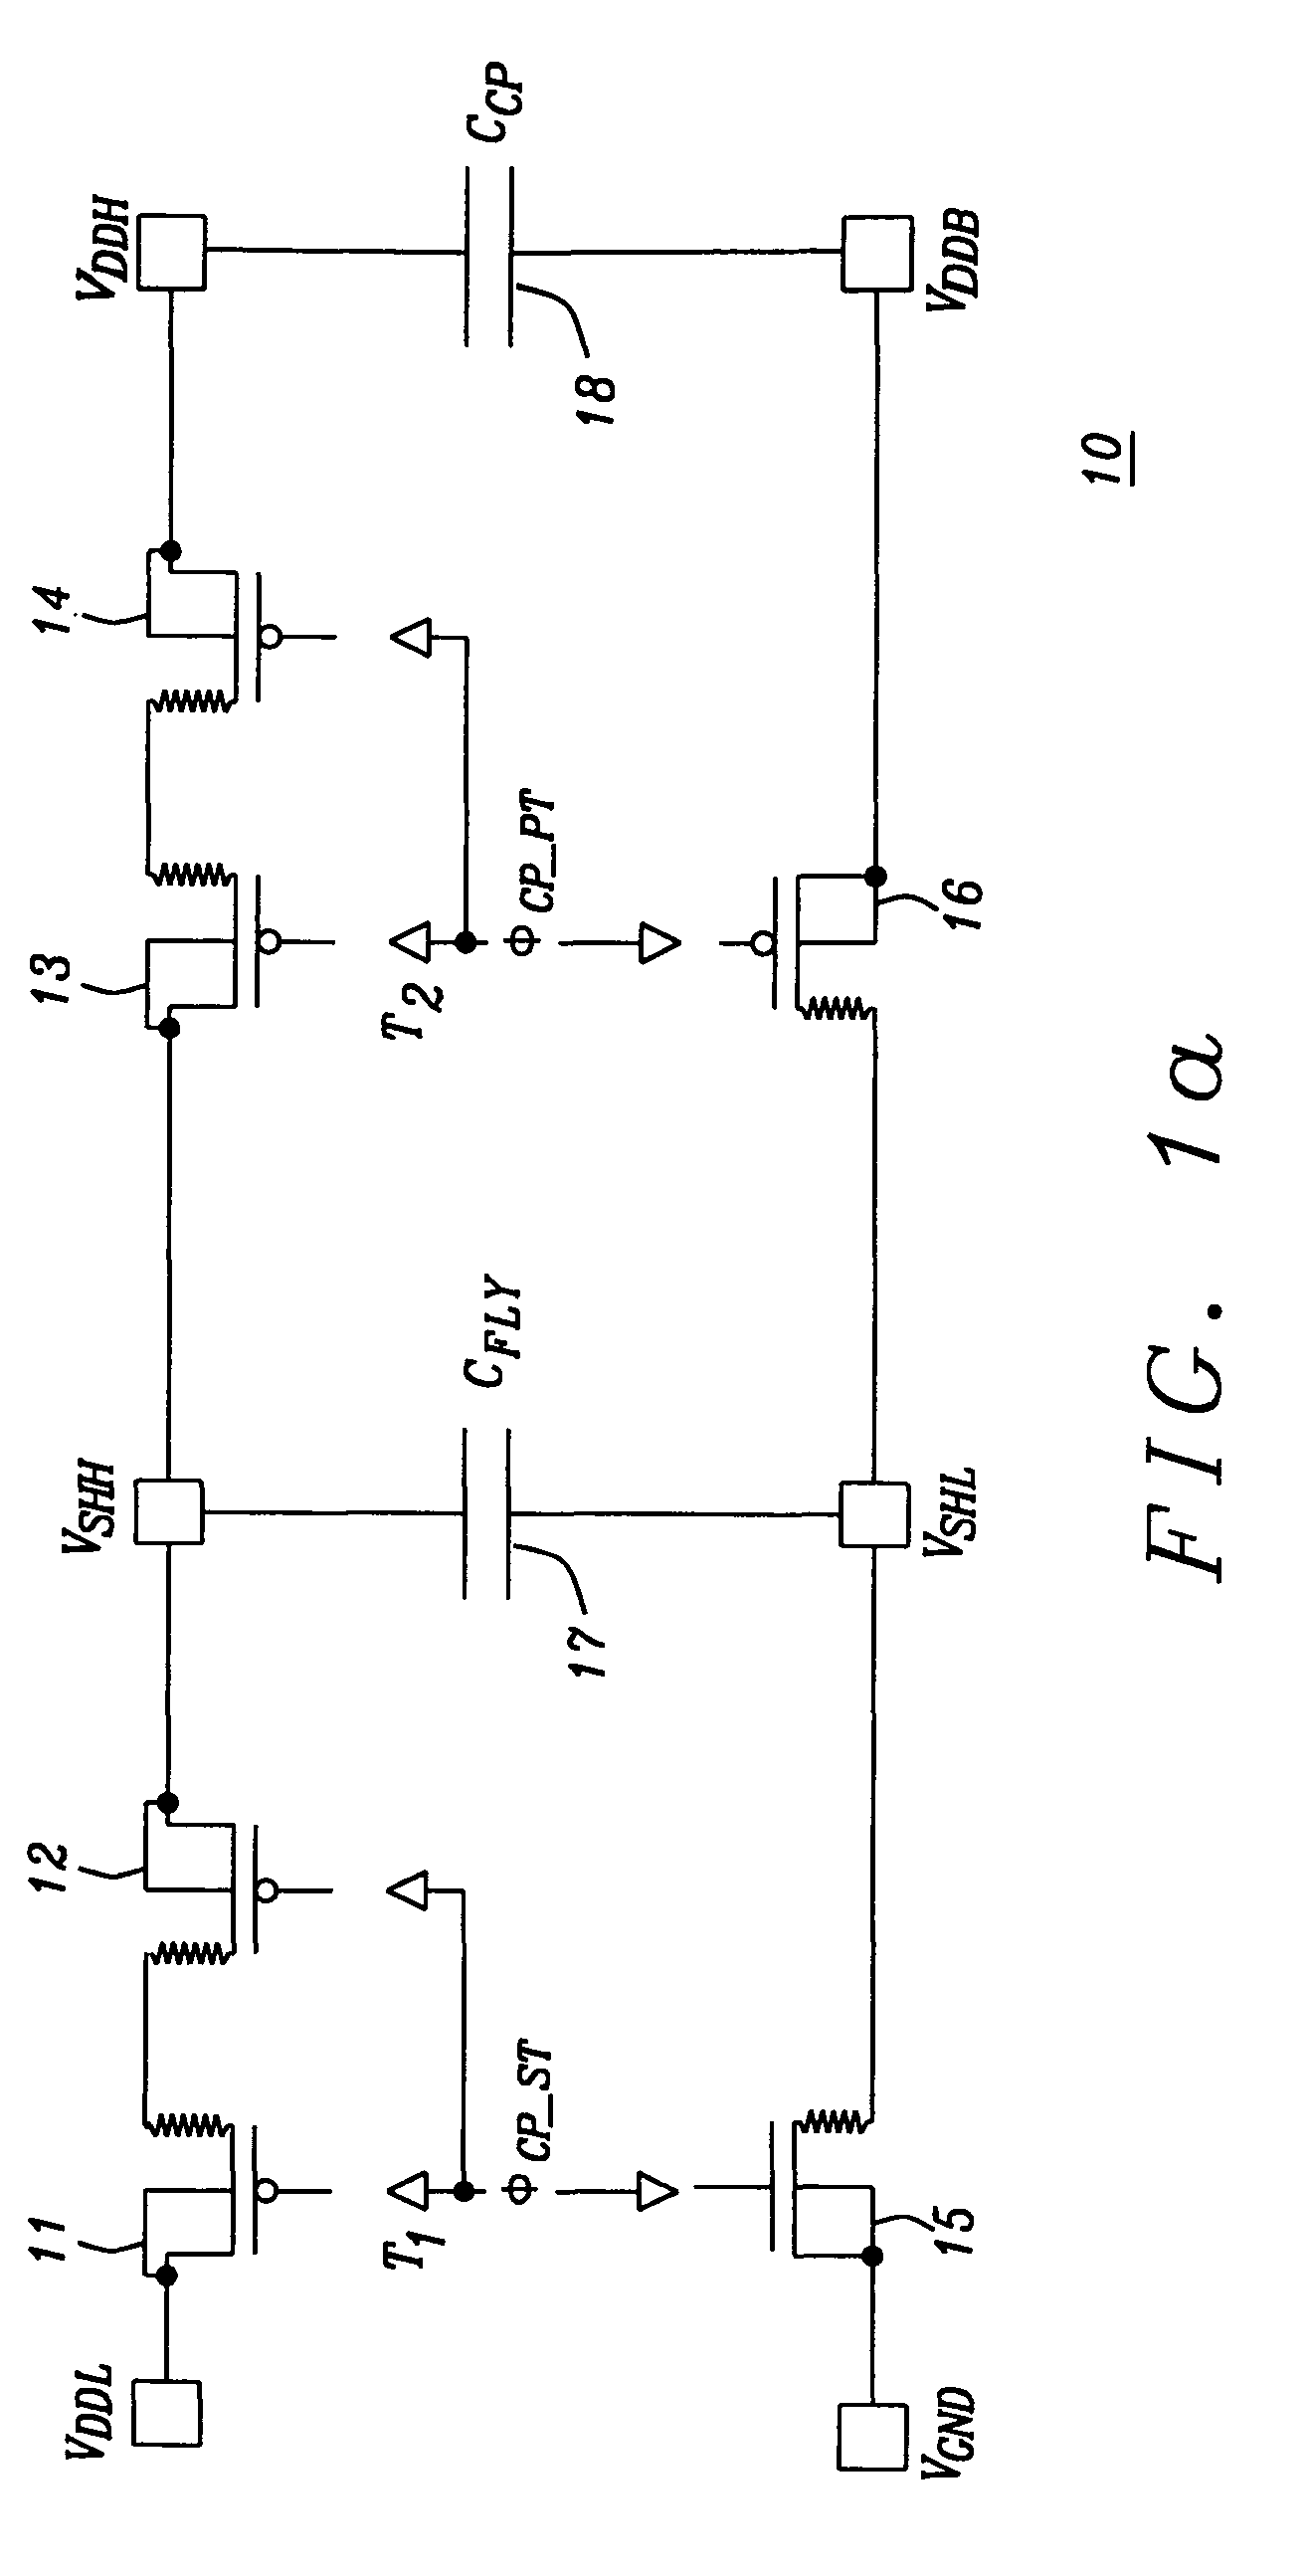 HVNMOS/HVPMOS switched capacitor charge pump having ideal charge transfer